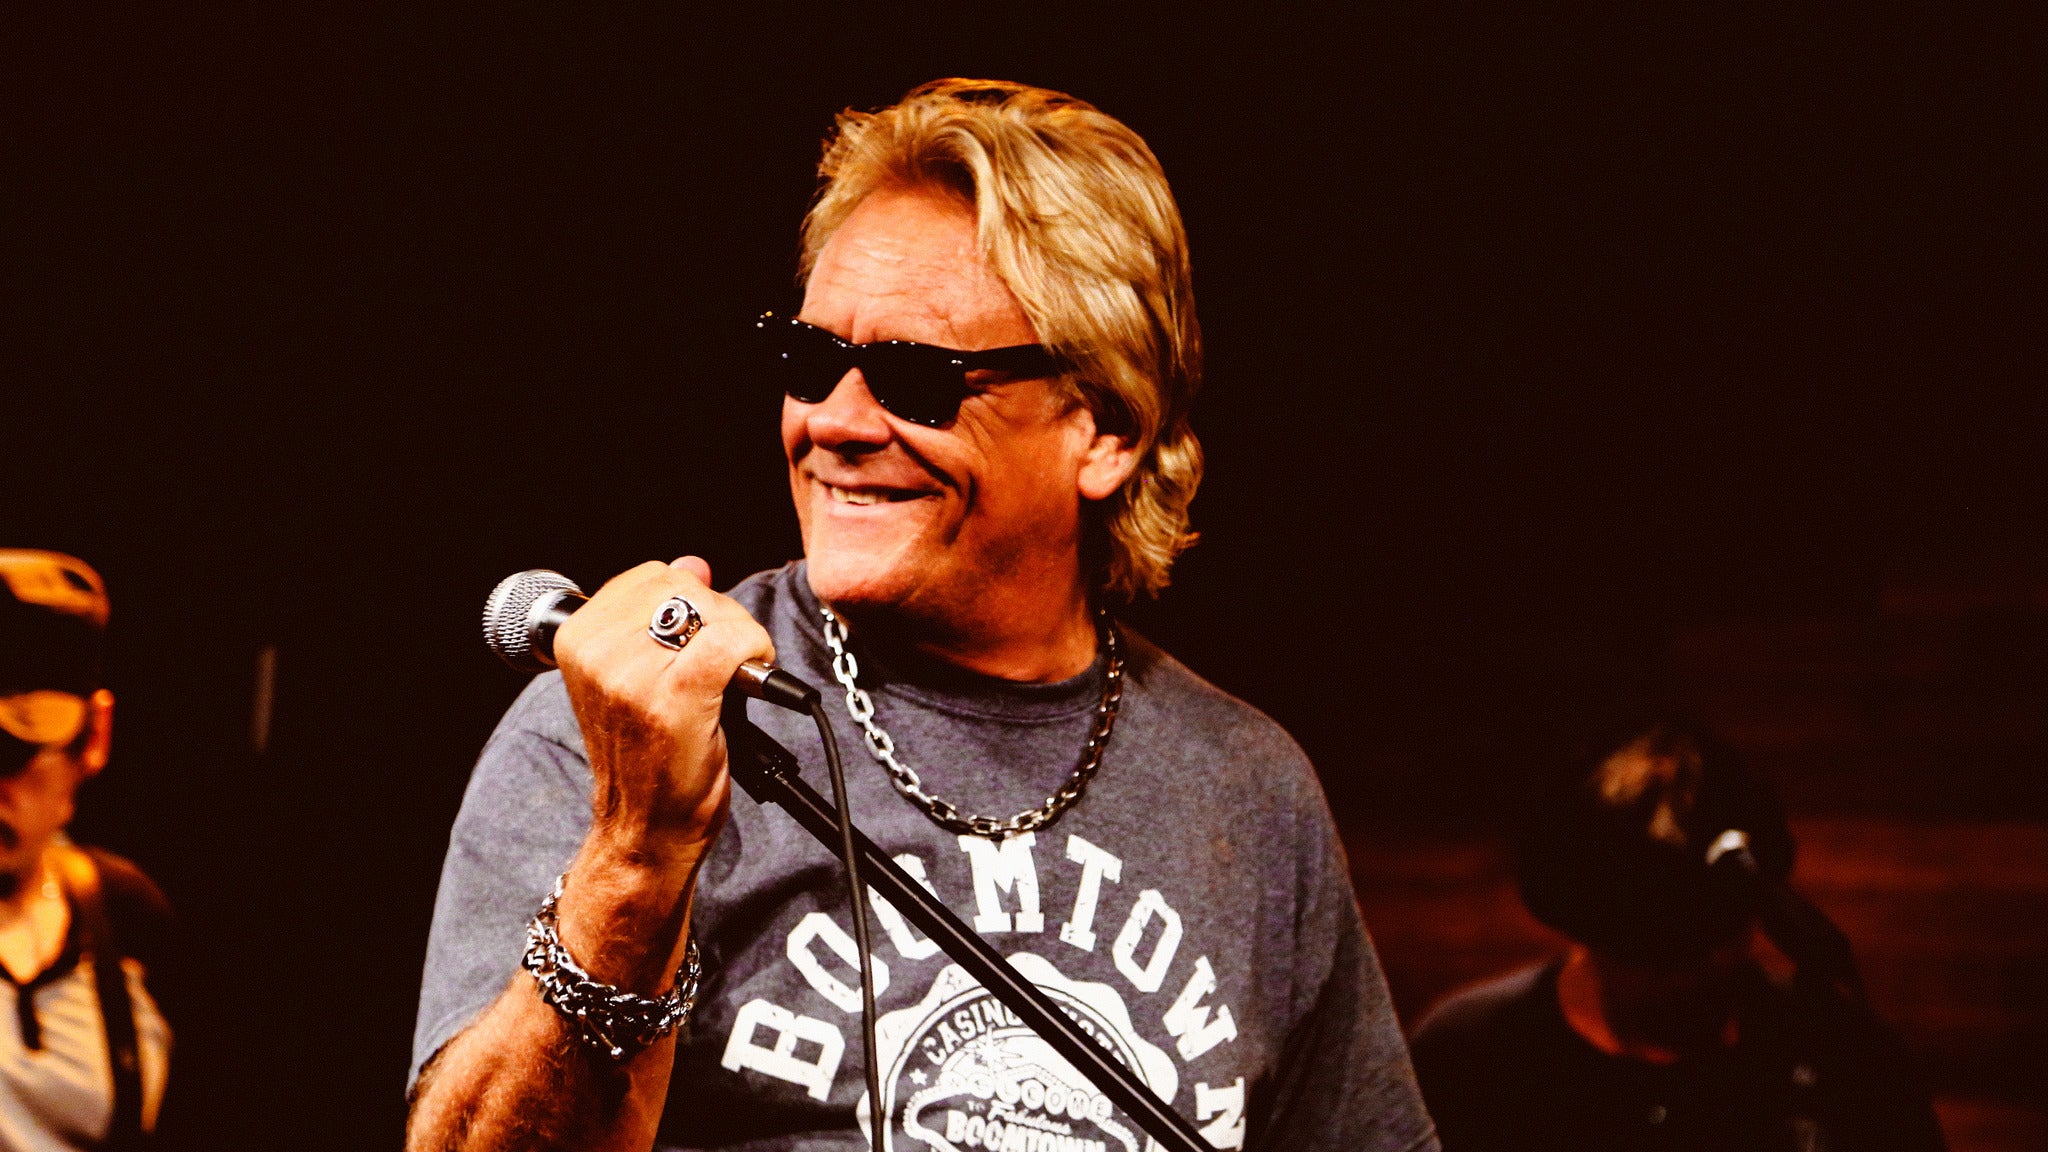 Brian Howe Former Lead Singer Of Bad Company in Jackpot promo photo for Social presale offer code